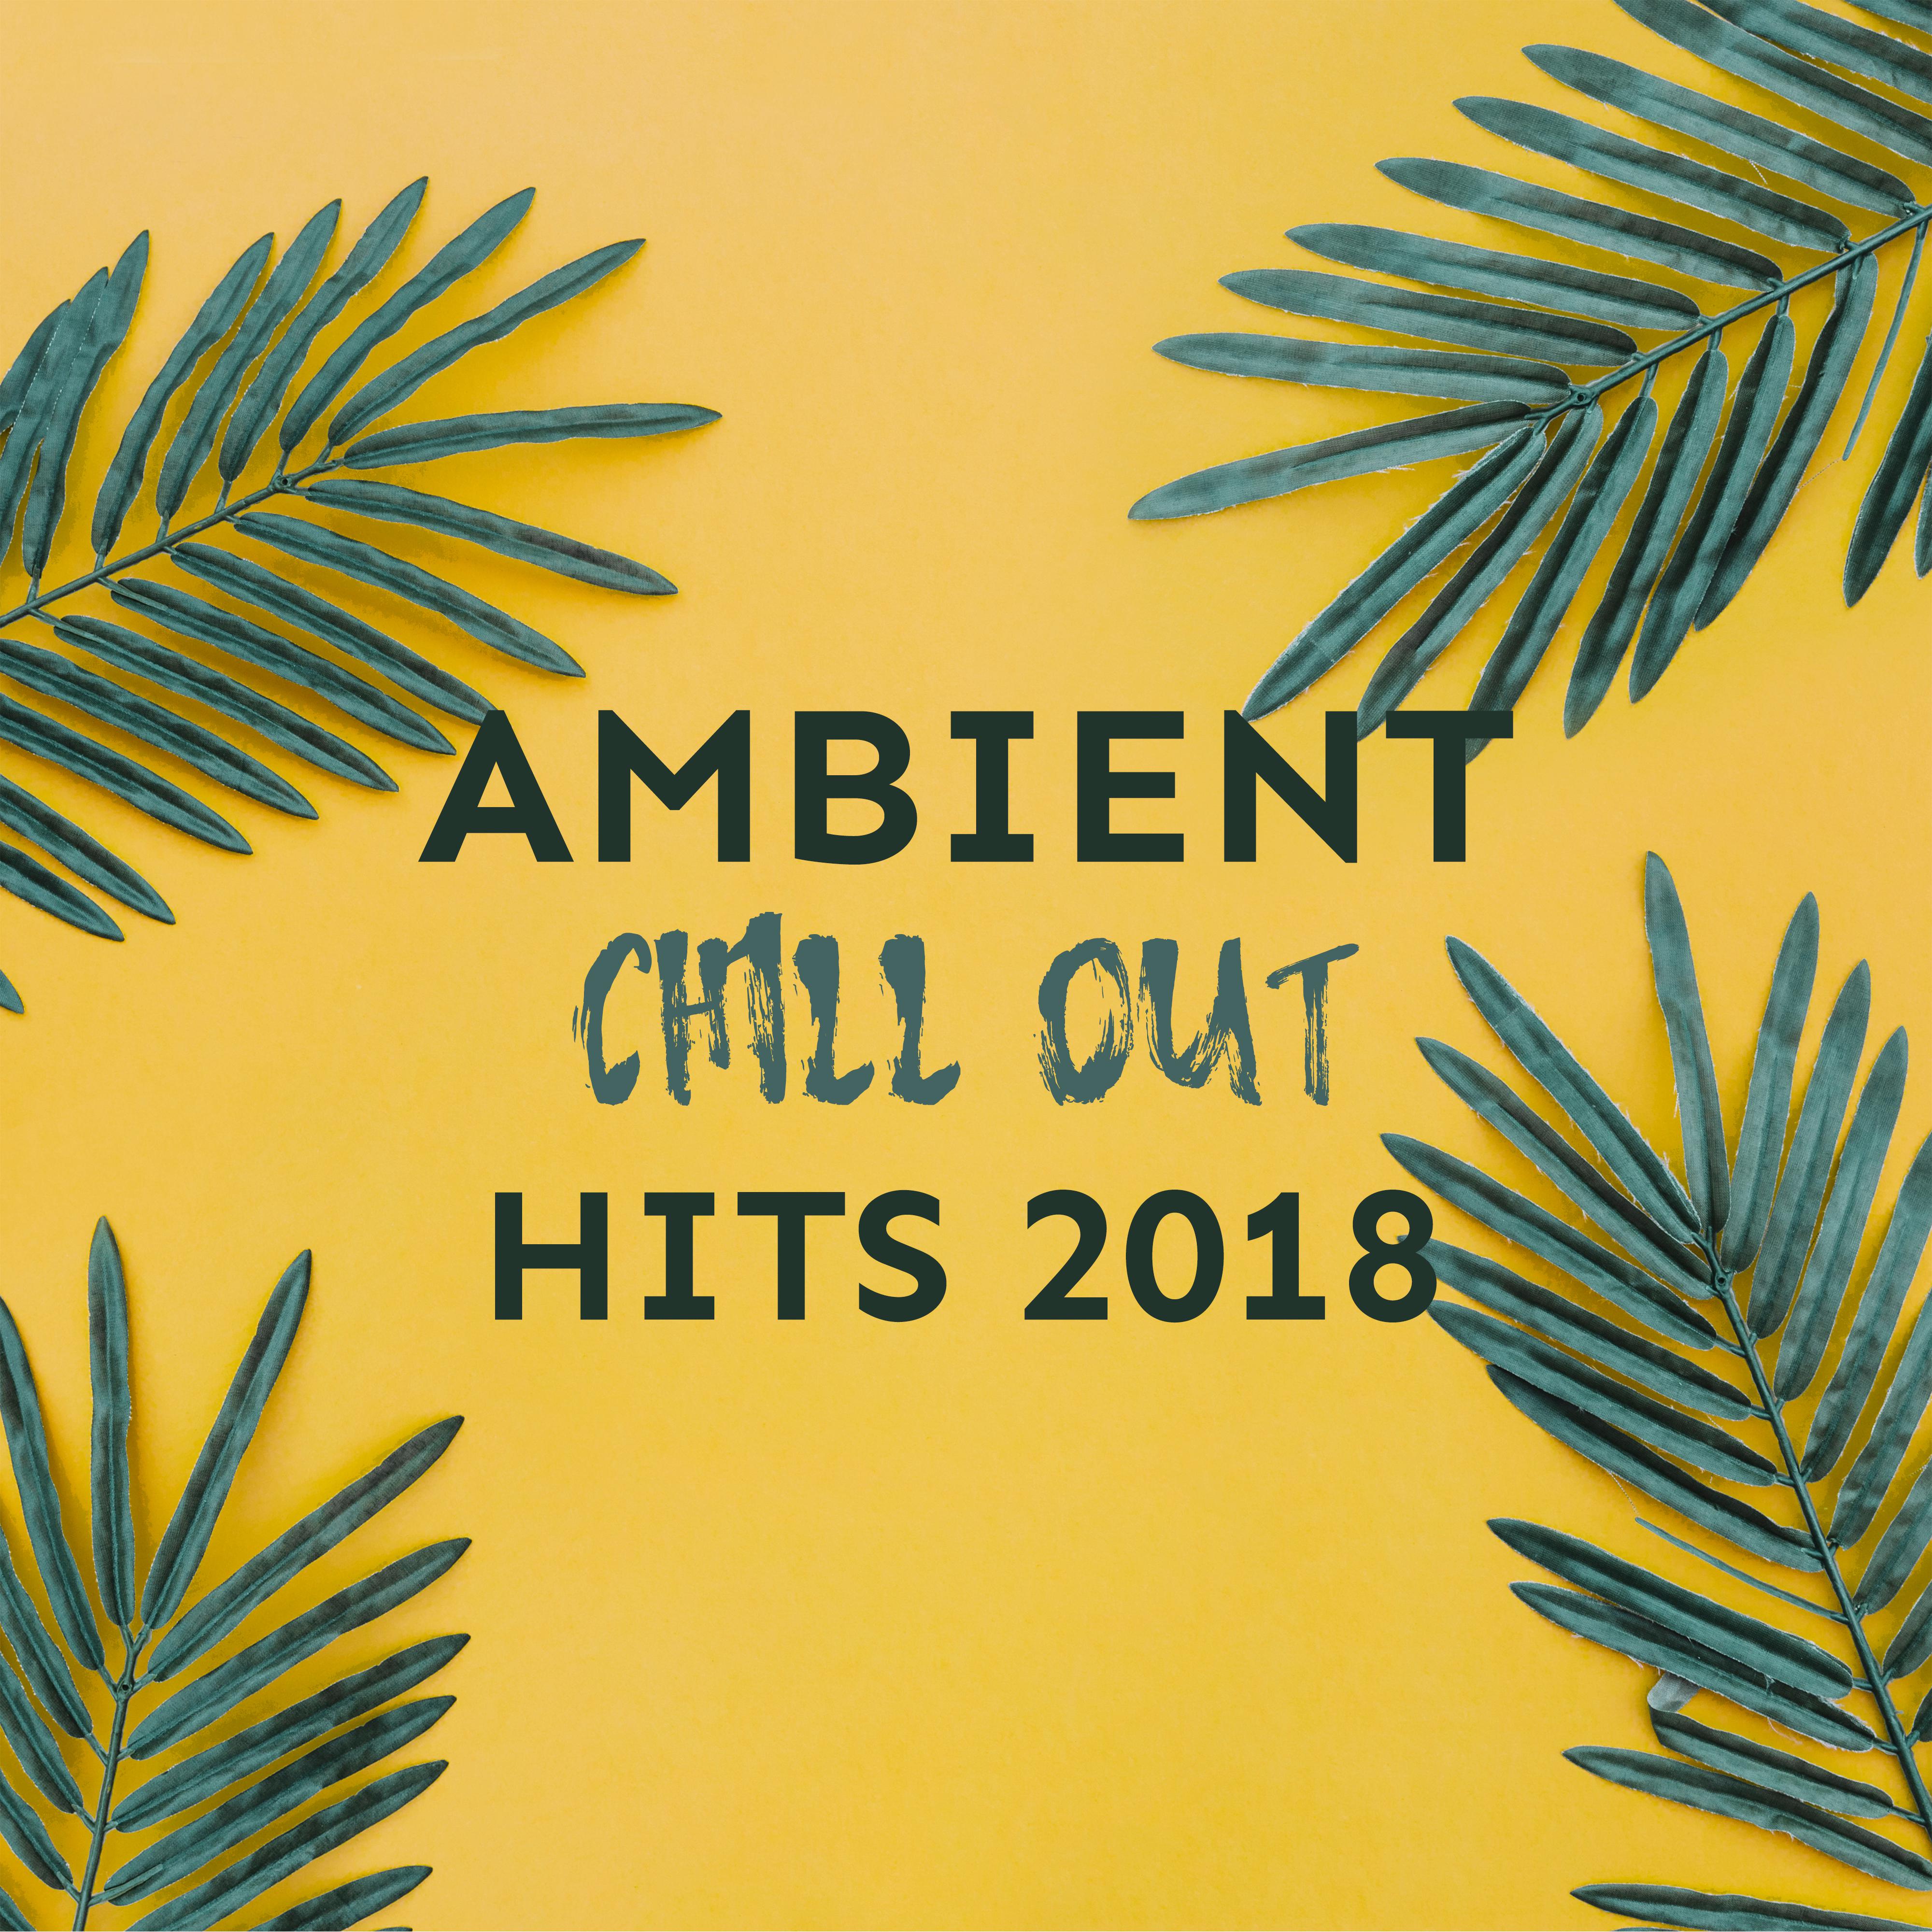 Ambient Chill Out Hits 2018